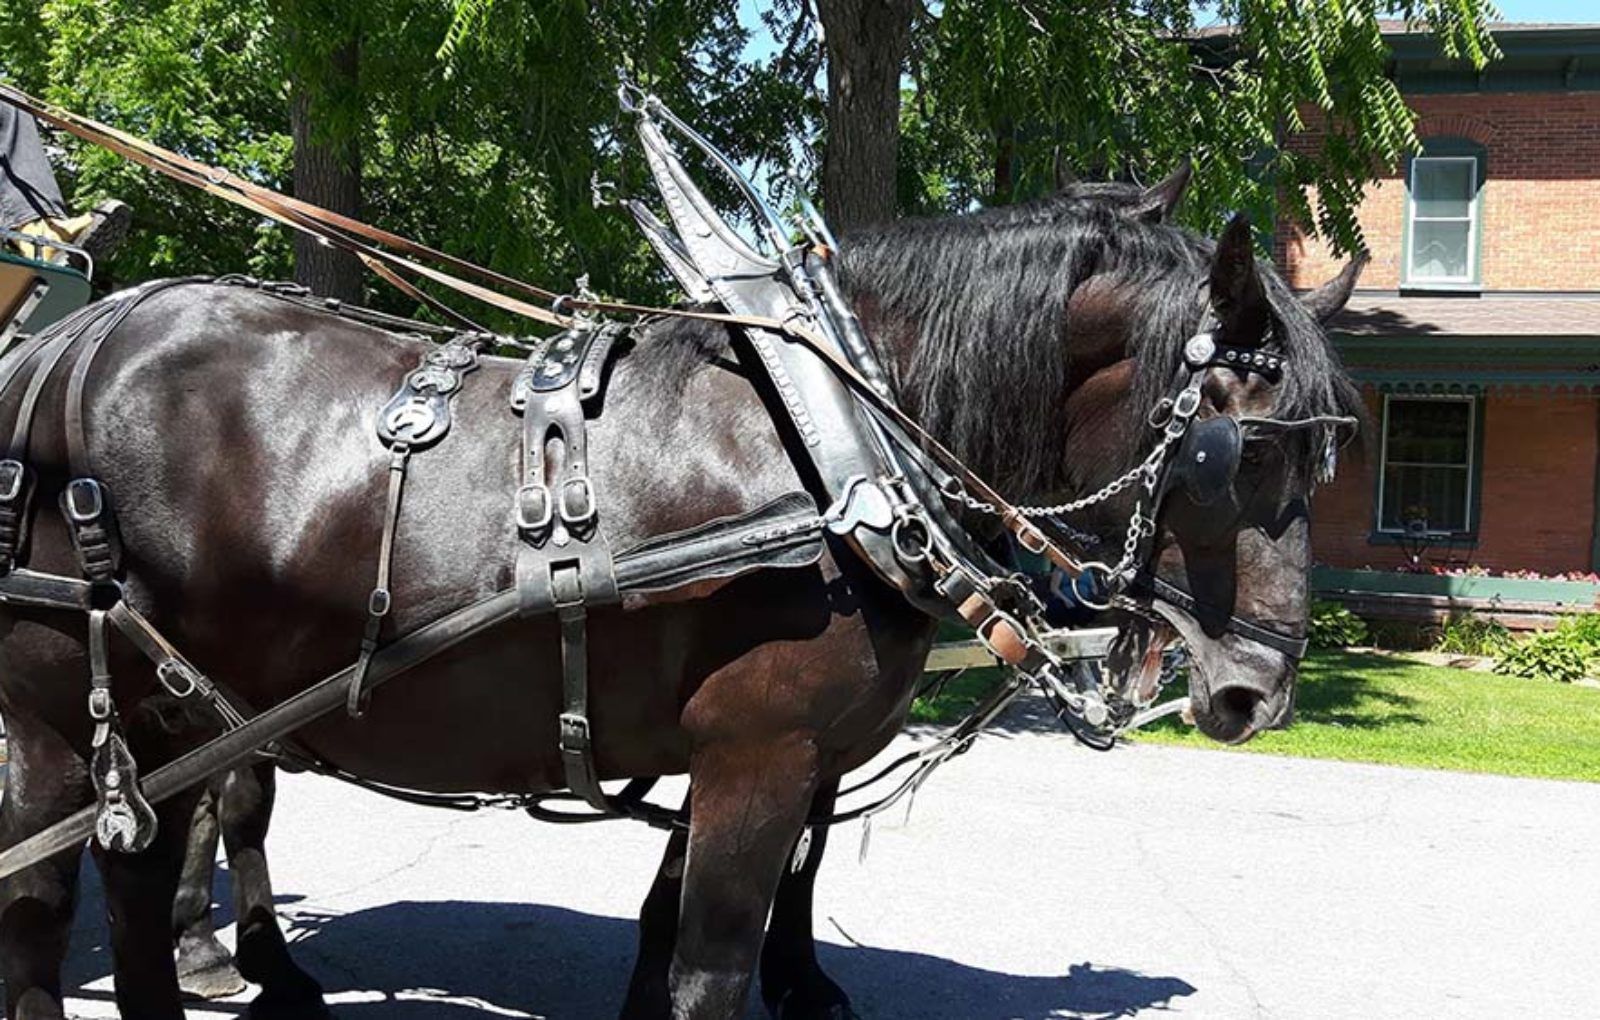 LS_July 10 2019 Horse and Buggy Parade (57)